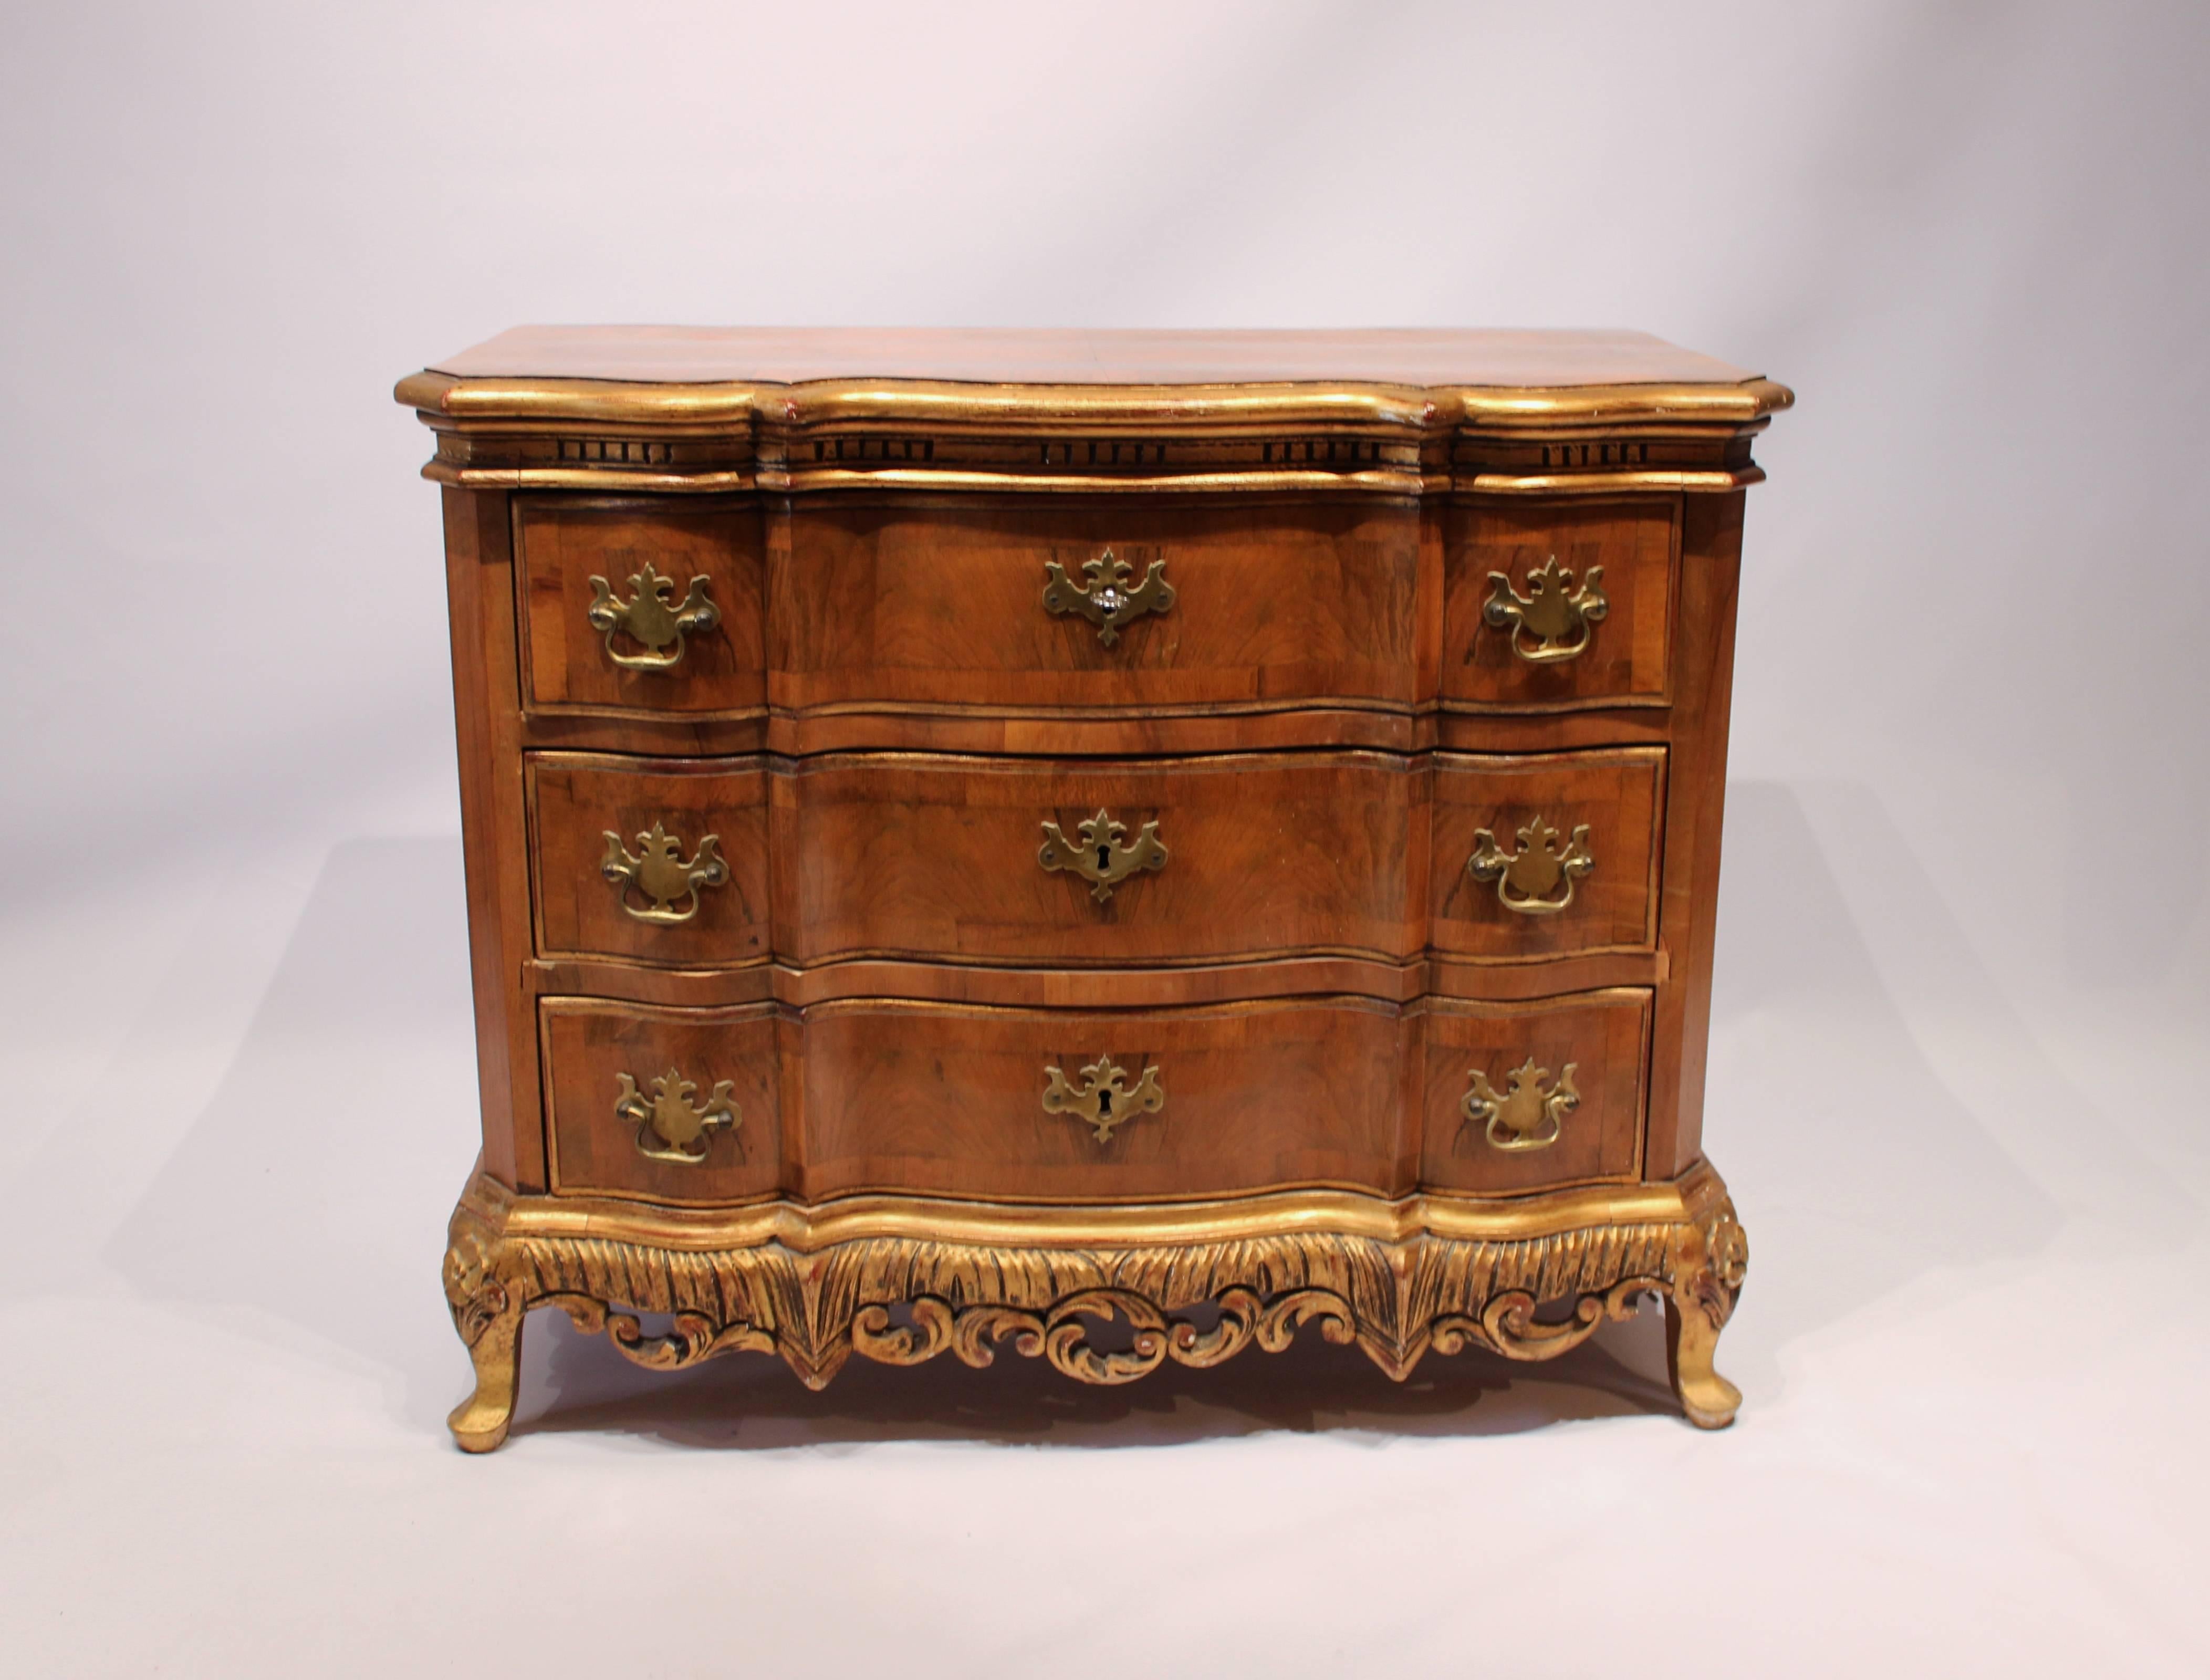 Rococo chest of drawers in walnut decorated with gold leaf from Denmark from the 1880s. The chest is in great vintage condition.